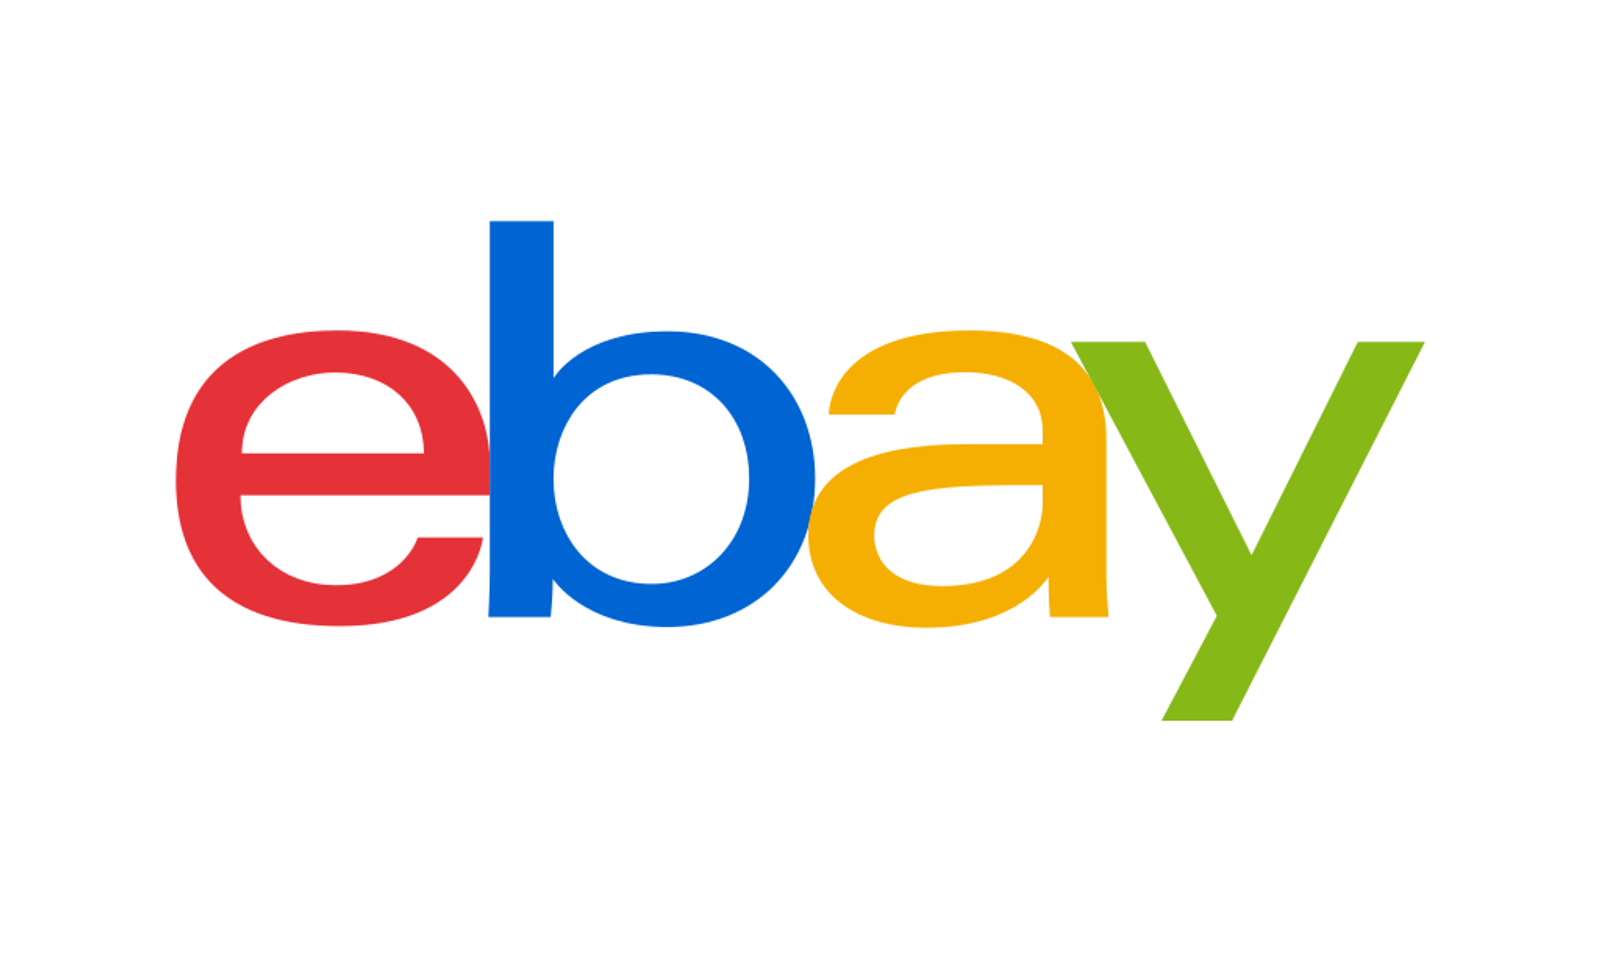 eBay to Ban Sale of Adult Items Effective June 15